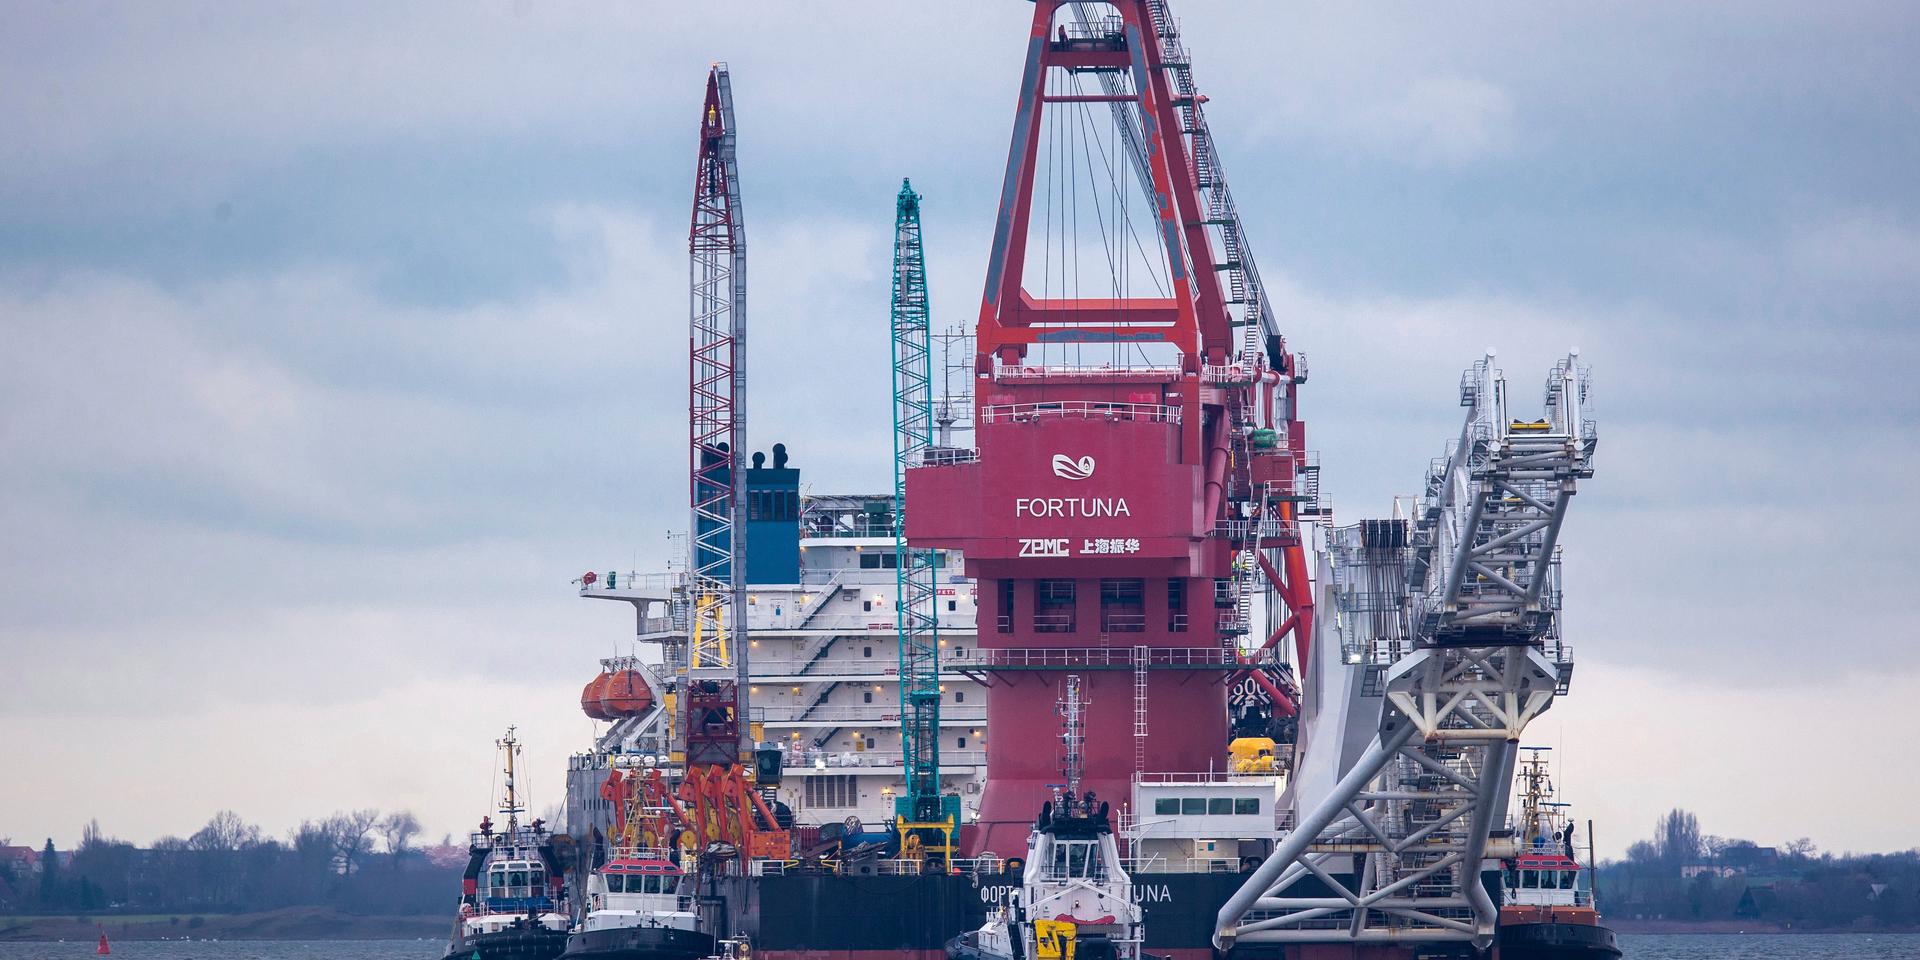 Tugboats get into position on the Russian pipe-laying vessel &quot;Fortuna&quot; in the port of Wismar, Germany, Thursday, Jan 14, 2021. The special vessel is being used for construction work on the German-Russian Nord Stream 2 gas pipeline in the Baltic Sea. ( Jens Buettner/dpa via AP)  DMSC121